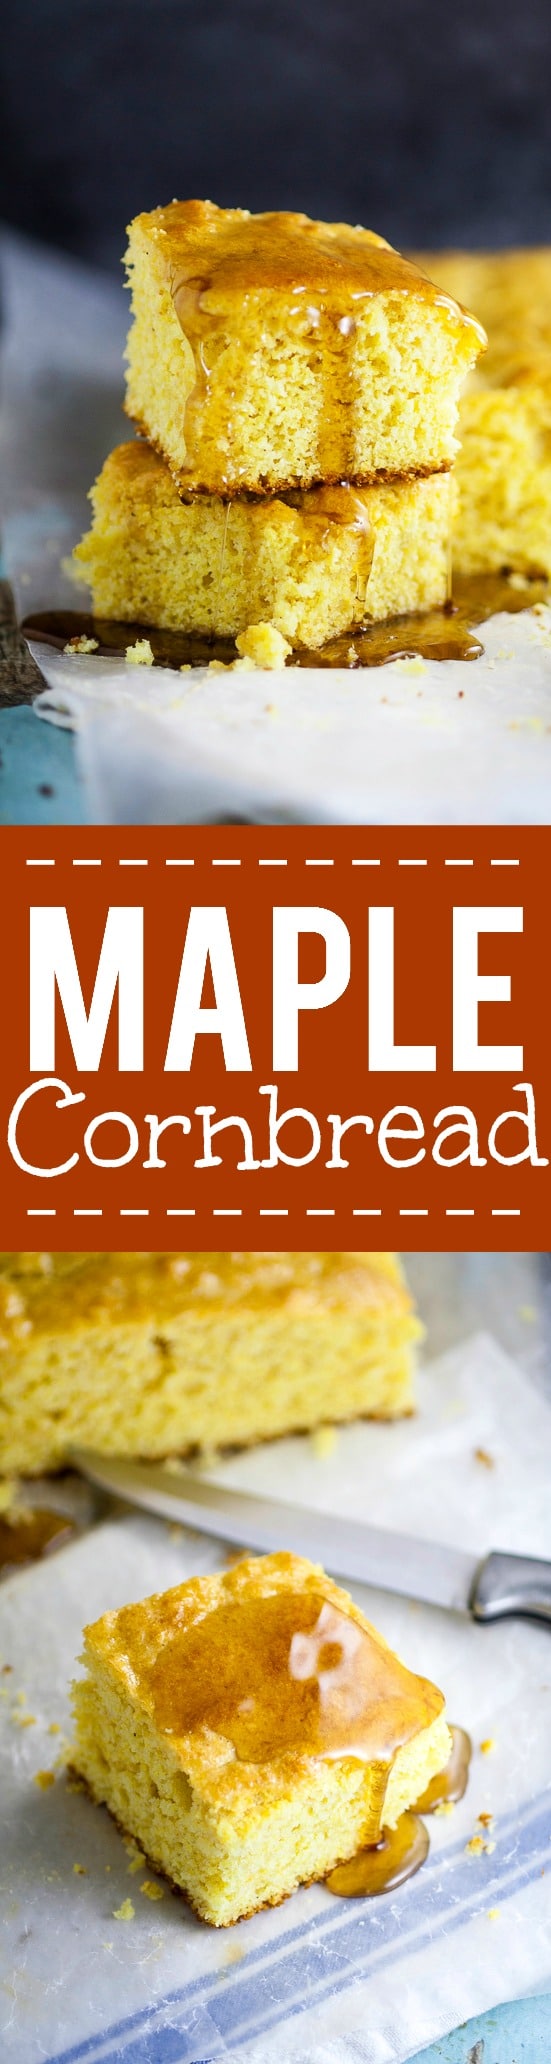 Maple Cornbread Recipe - A sweet, maple twist on a classic favorite, this homemade Maple Cornbread recipe is made from scratch and takes traditional cornbread to a whole new delicious level. A delicious Fall twist on a traditional favorite.  Yummmm!